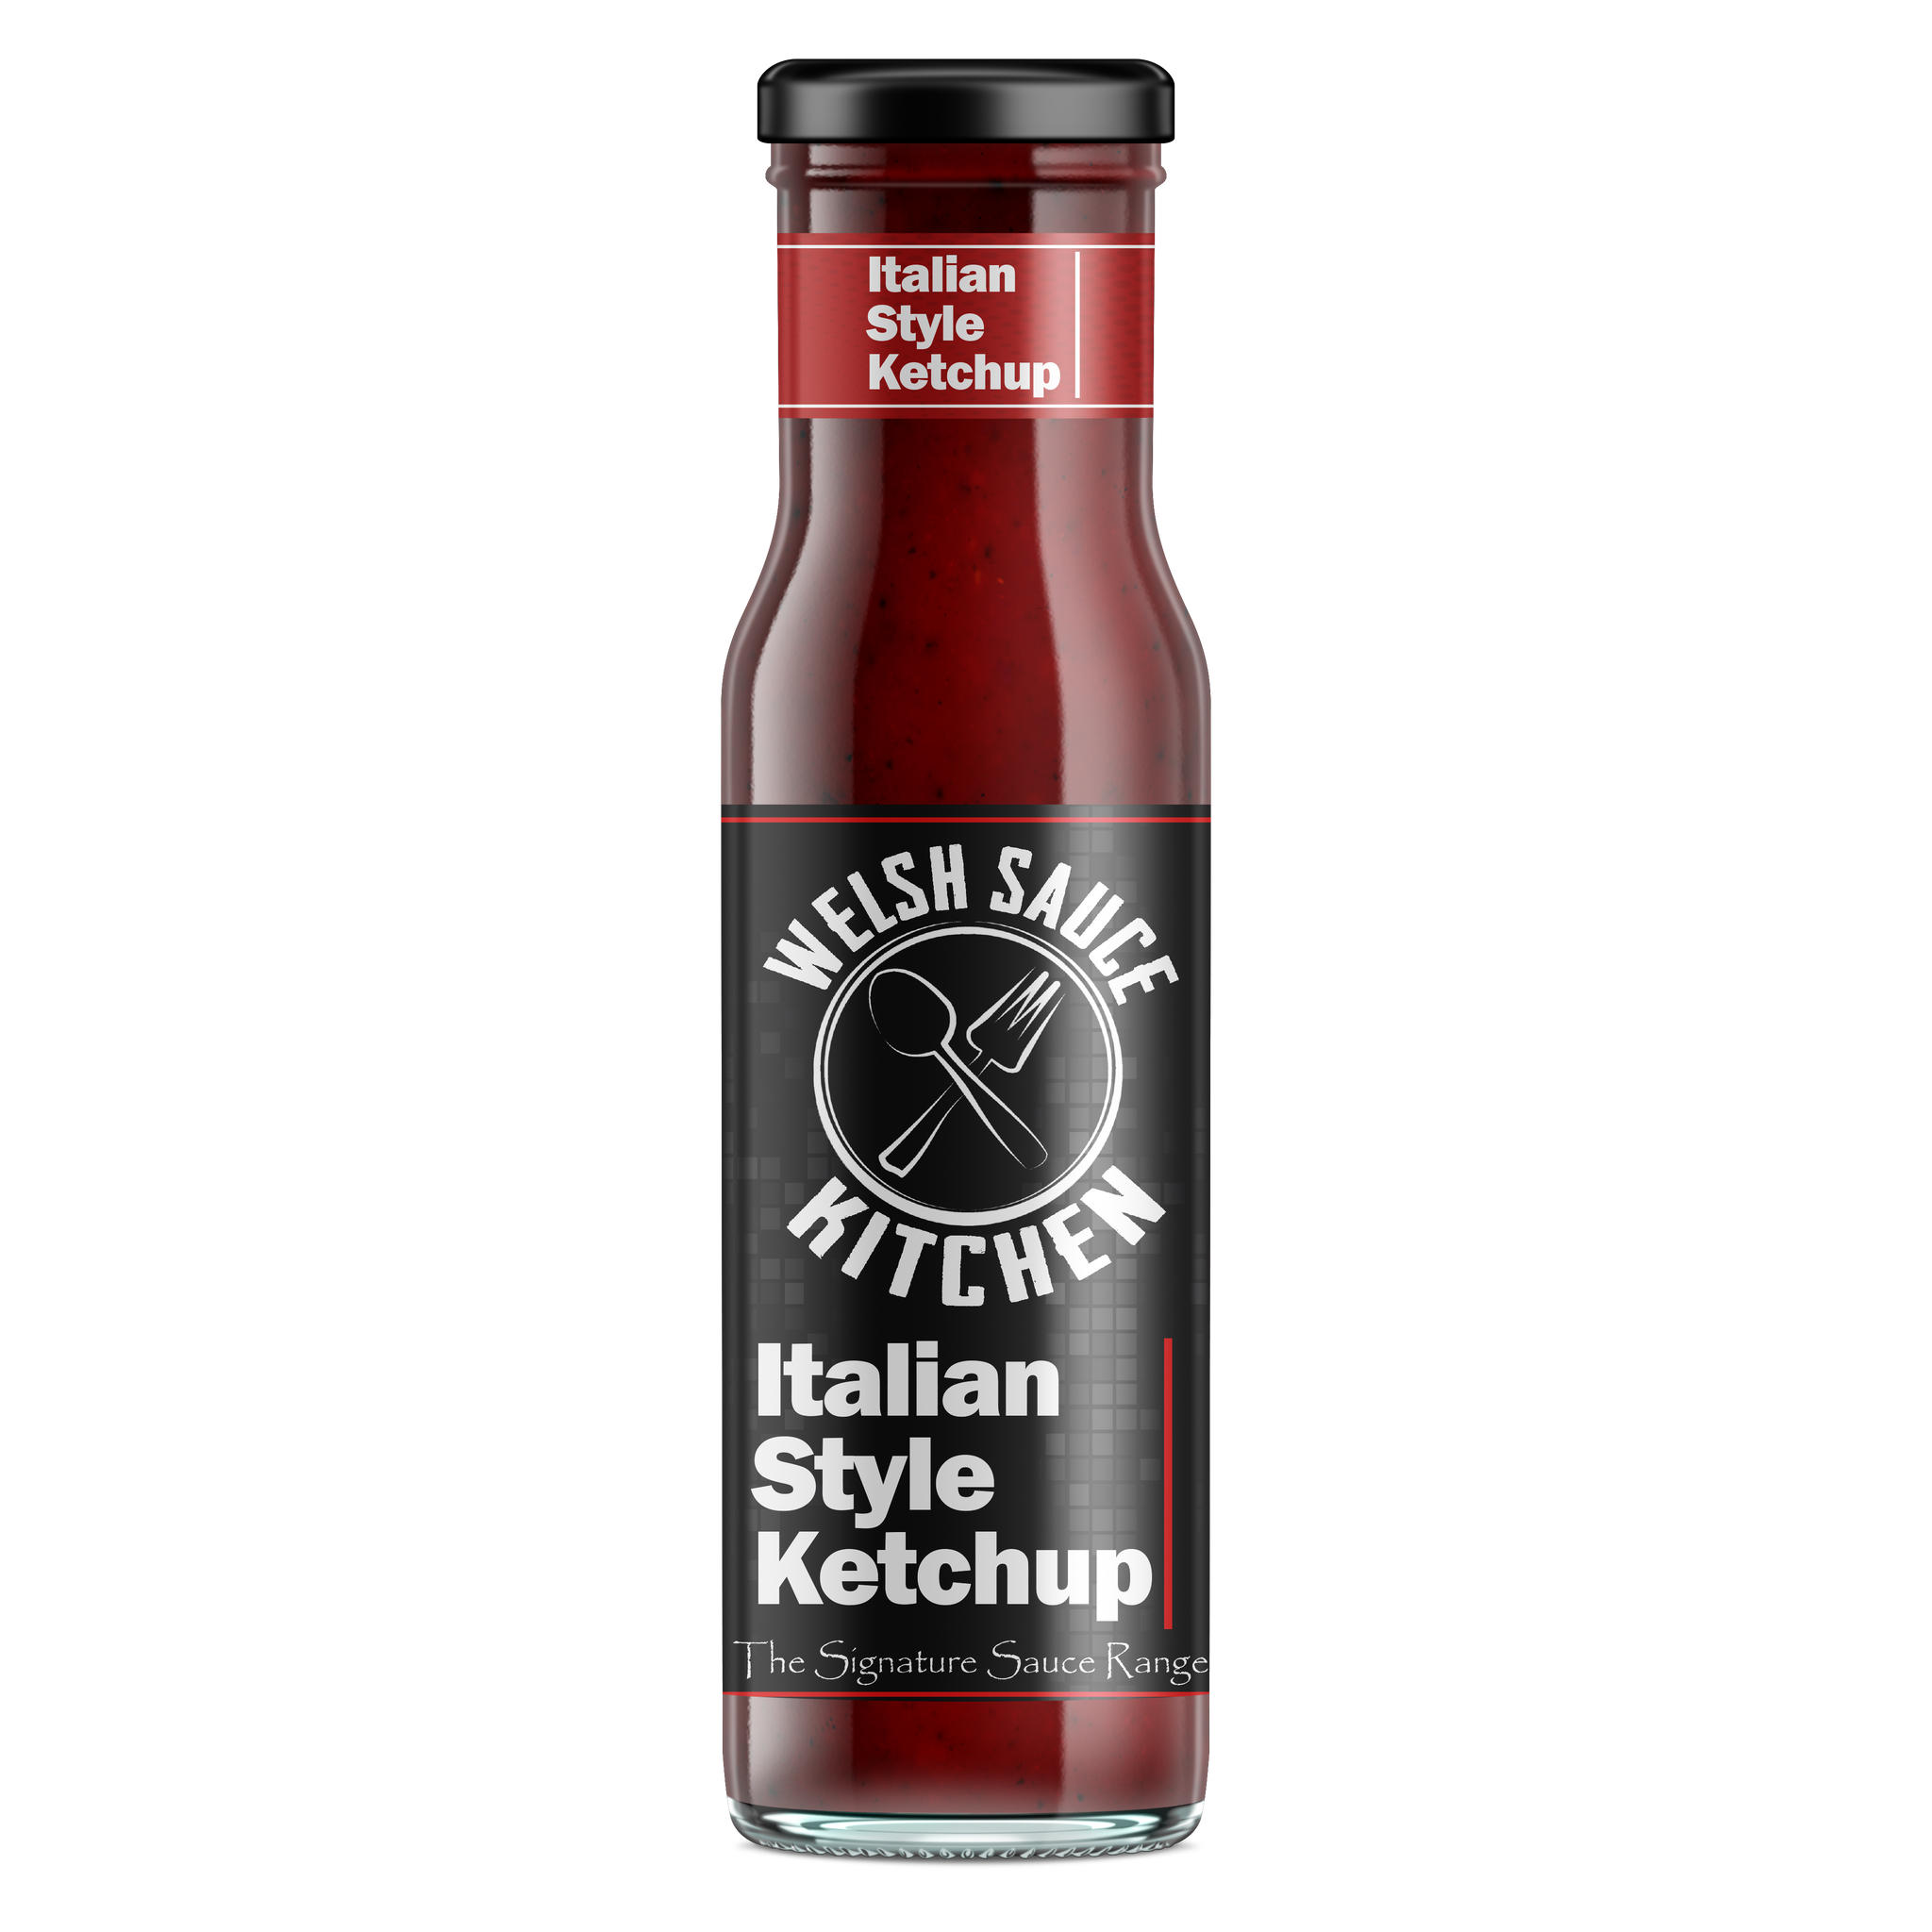 Welsh Sauce Kitchen Italian Style Ketchup (6x270g)